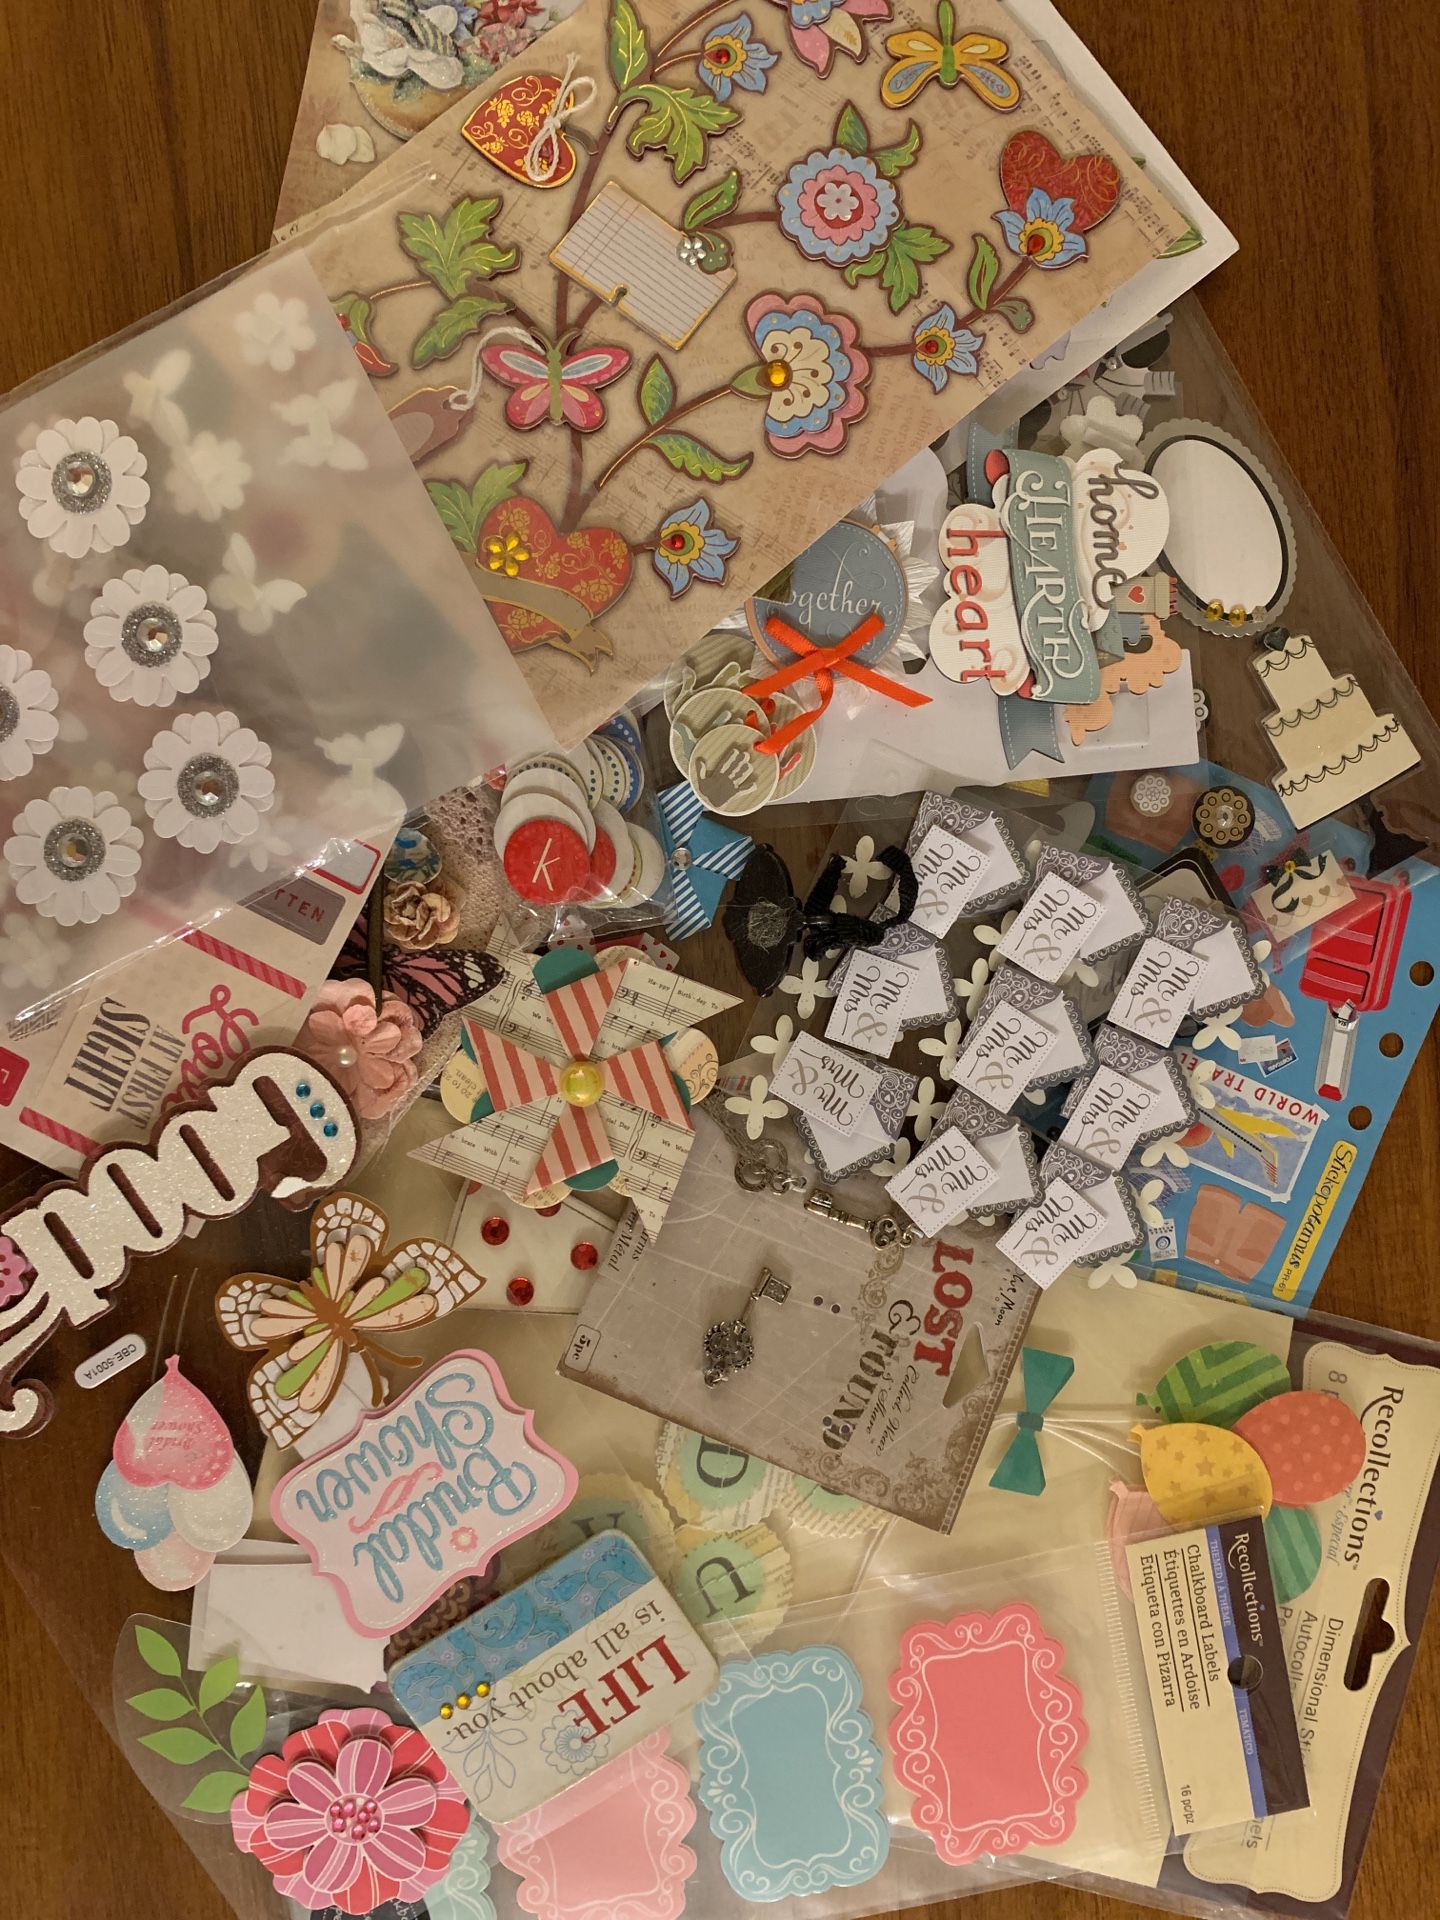 Scrapbooking Supplies - stickers and paper!